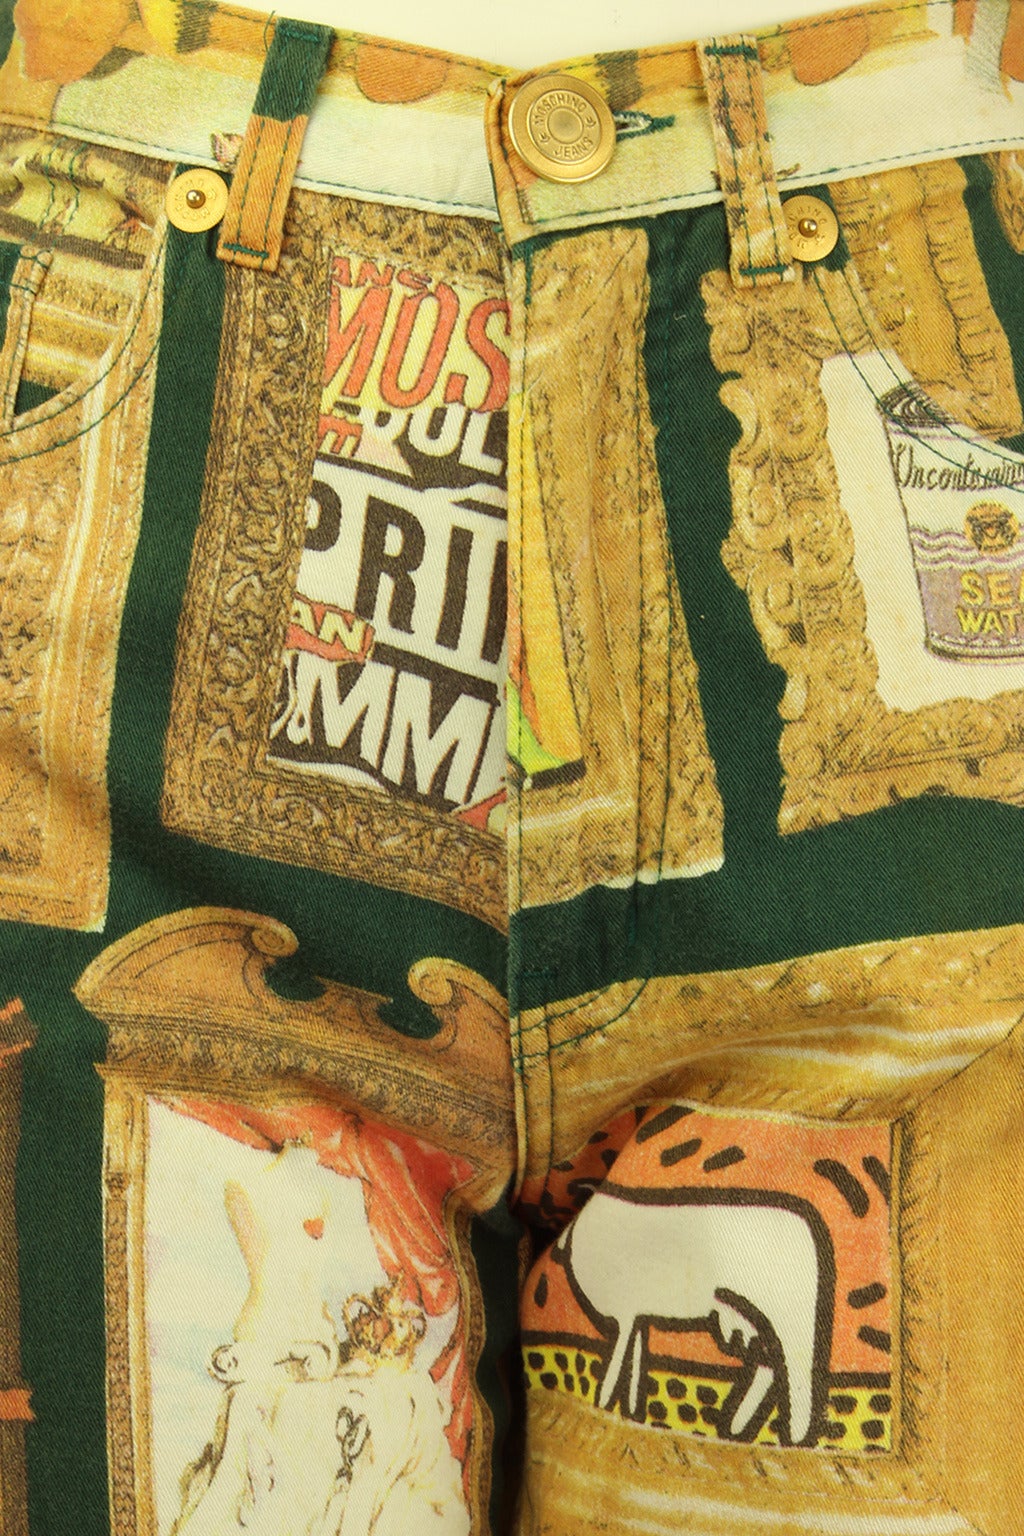 These early 1990's jeans are covered in a photo print of framed art pieces. Warhol like and Keith Haring esque images are mixed with Moschino symbols & words.